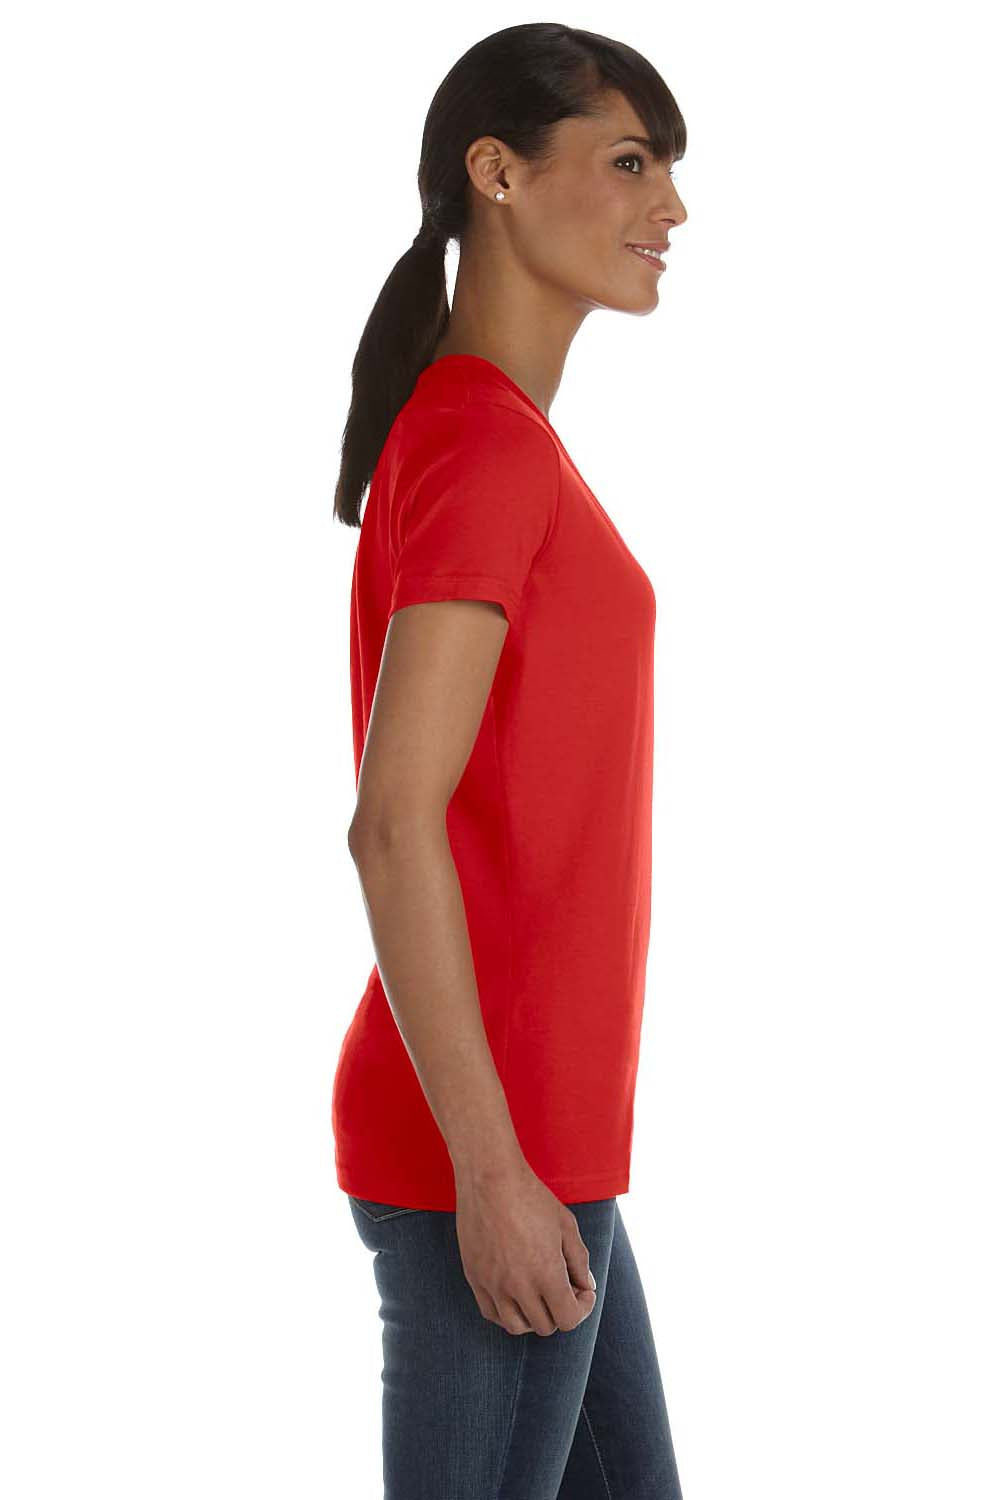 Fruit Of The Loom L39VR Womens HD Jersey Short Sleeve V-Neck T-Shirt Red Side